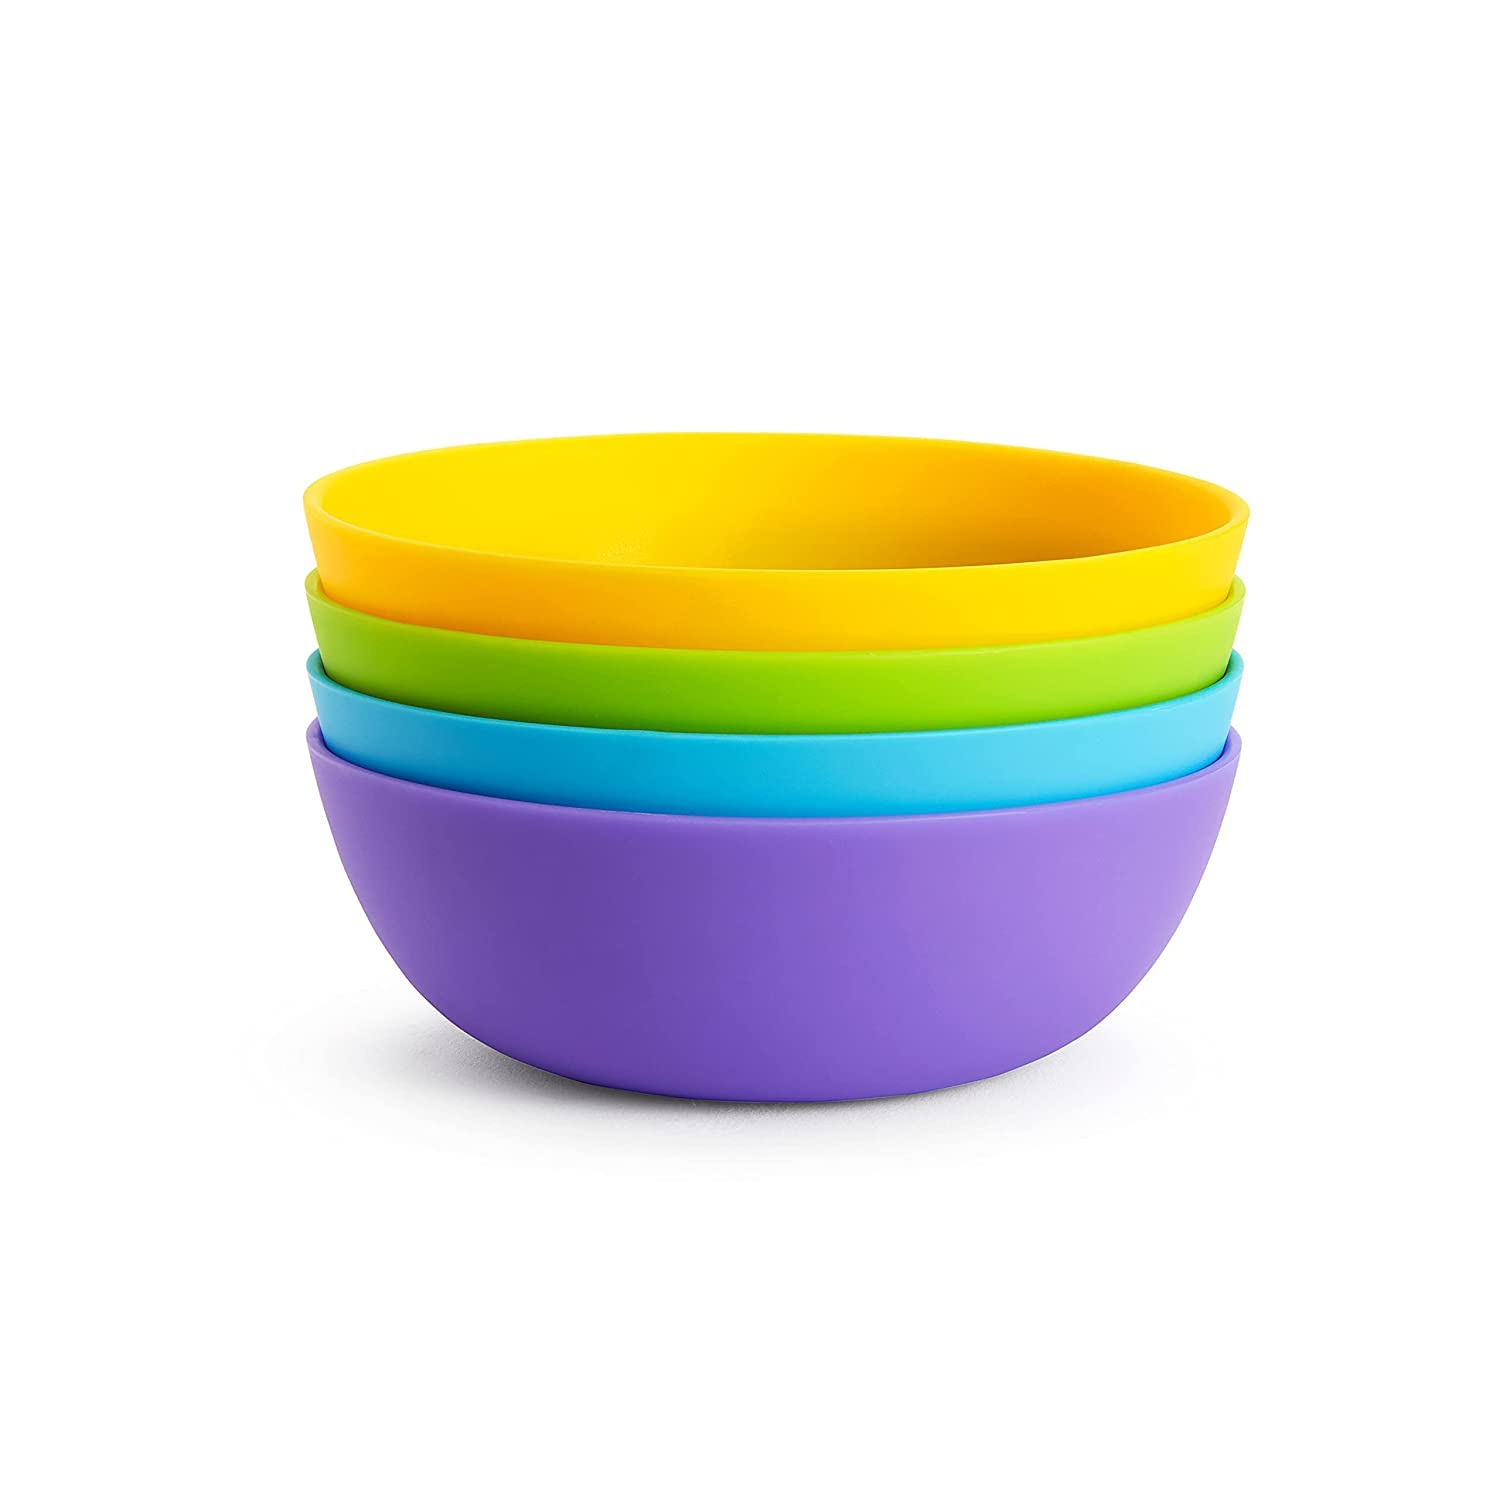 Munchkin 4-Pack Multi-Color Bowls for Feeding Toddlers.